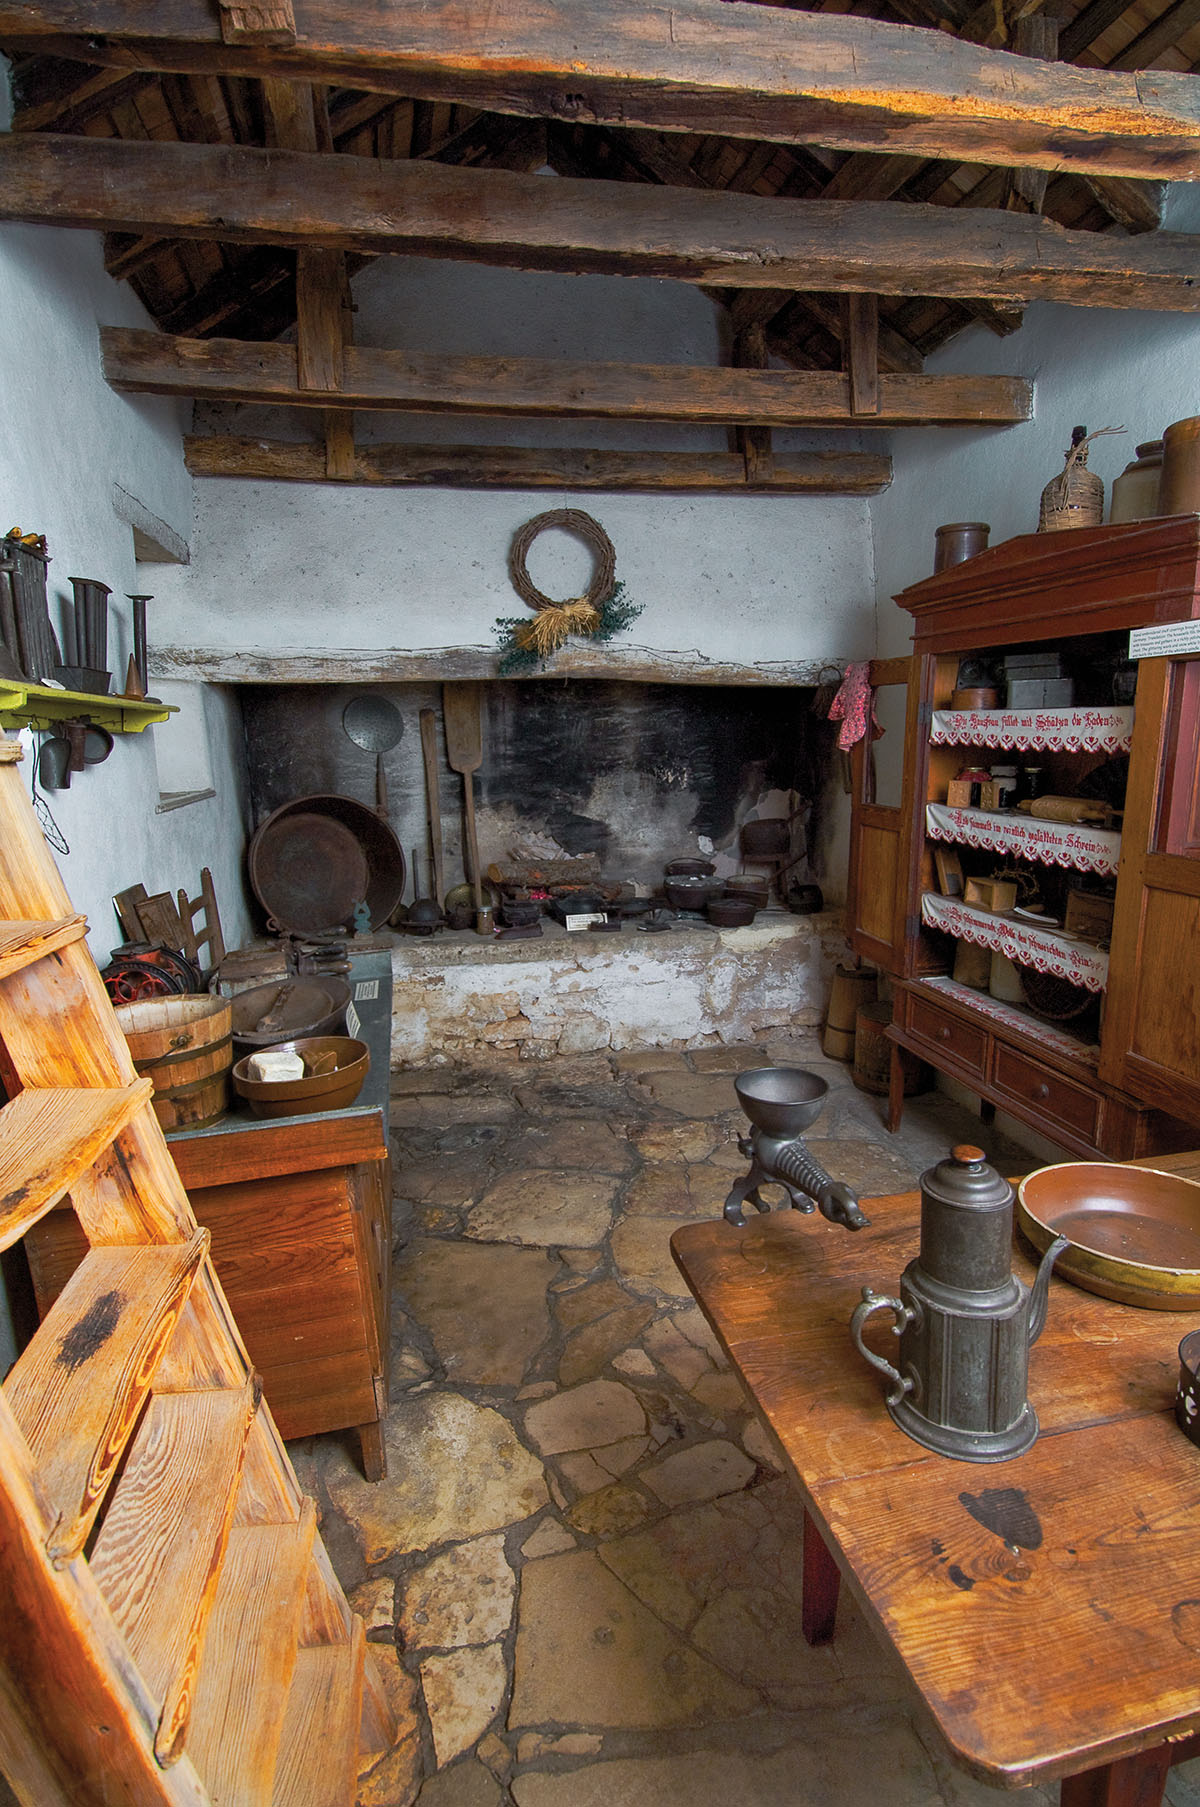 The interior of a room filled with numerous artifacts including cooking items, a ladder, and a stone floor